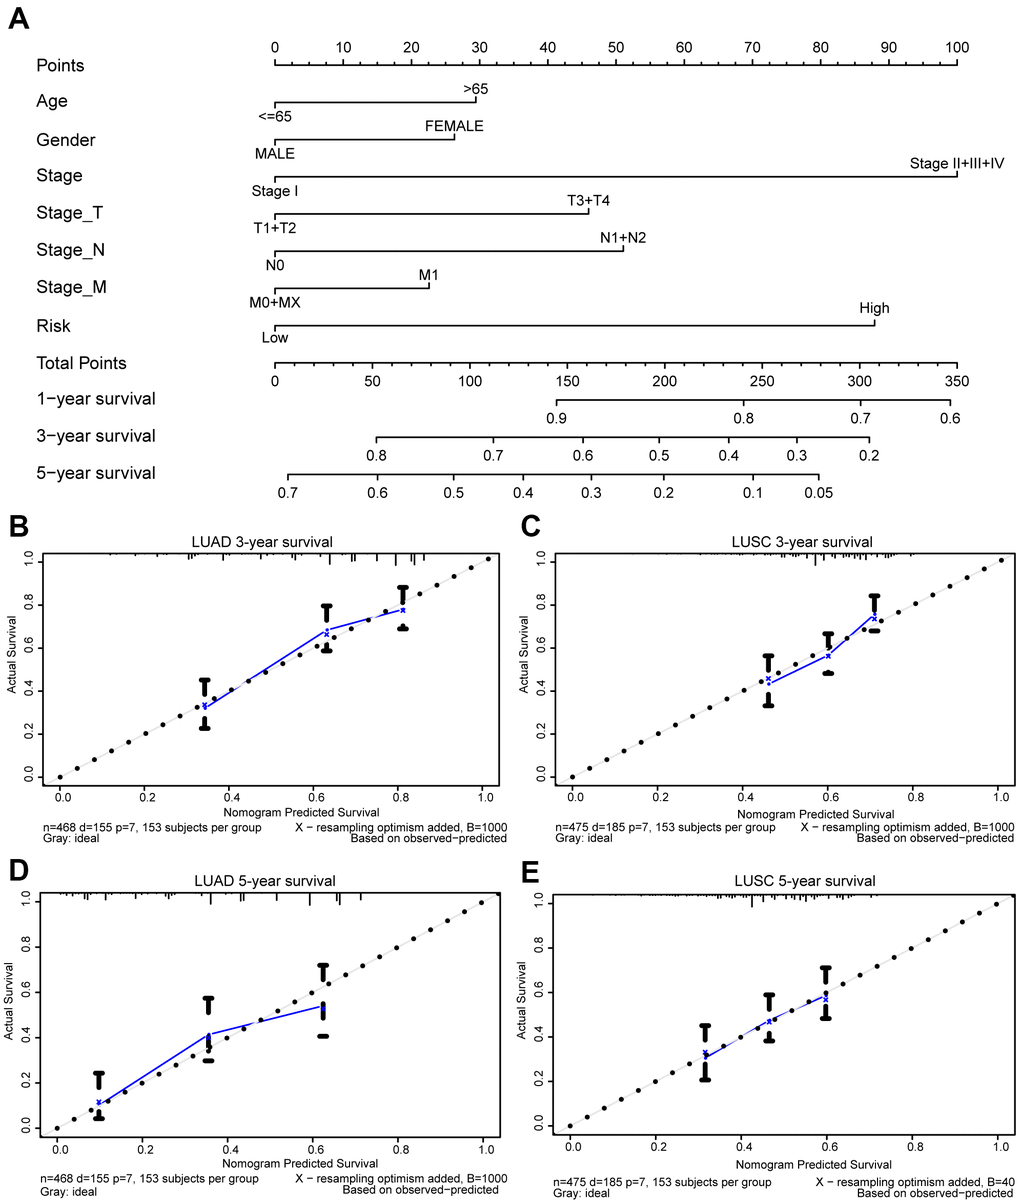 Prognostic nomogram for TCGA lung cancer cohorts. Nomogram for evaluating the survival probability of TCGA-LUAD patients (A). The calibration curves for predicting patient survival in TCGA-LUAD (B, D) and TCGA-LUSC (C, E). Overall survival (OS) derived from the nomogram is plotted on the x-axis, and actual OS is displayed on the y-axis. A plot approaching the 45° dashed line would show an ideal calibration model indicating the perfect concordance between the predicted probabilities and the actual survival.